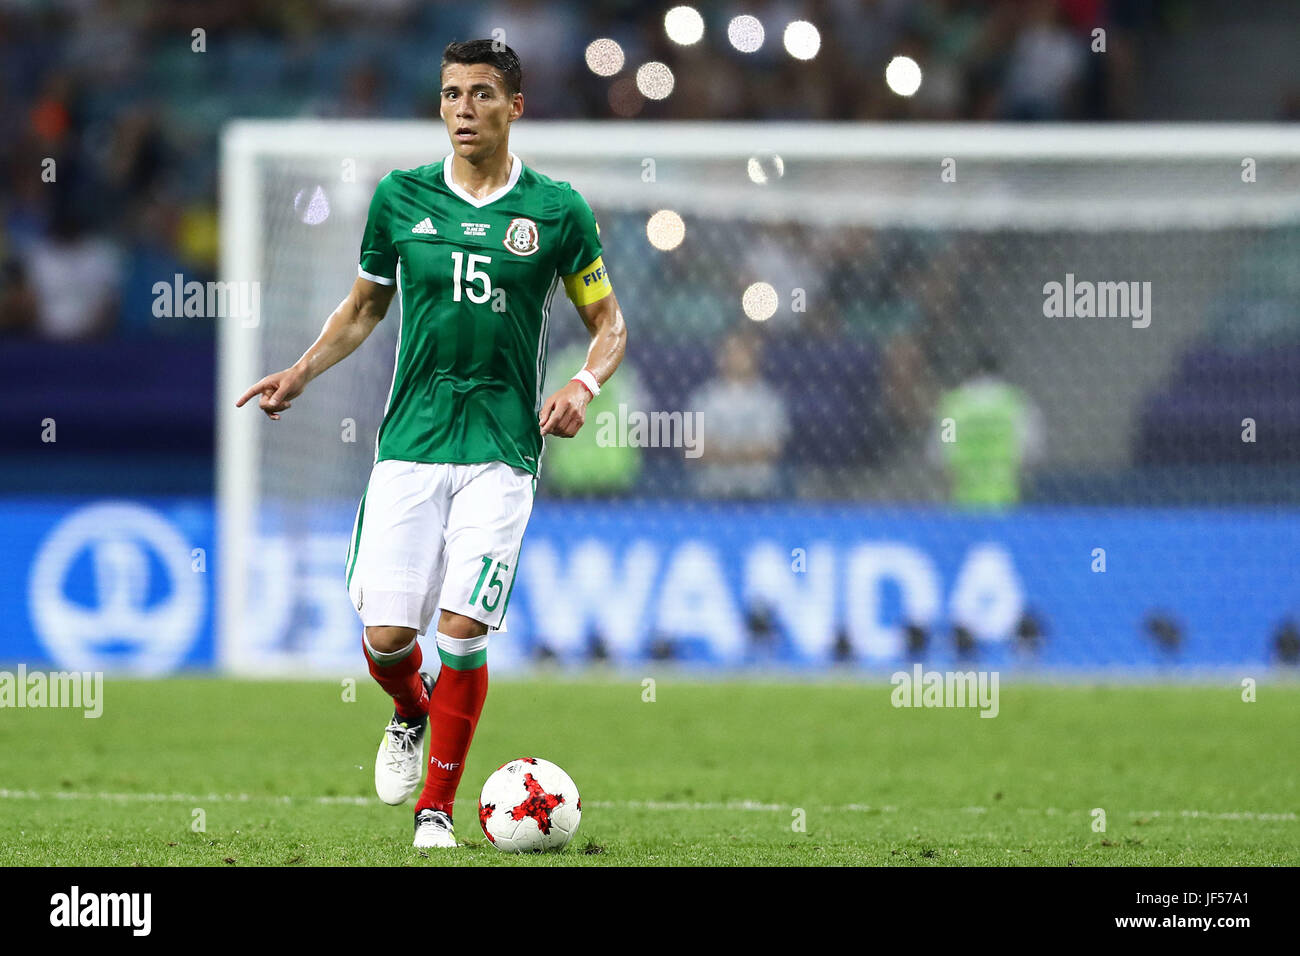 SOCHI, SC - 29.06.2017: GERMANY VS MEXICO - Hector Moreno of Mexico during a match between Germany and Mexico valid for the semifinals of the 2017 Confederations Cup on Thursday (29th), held at the Sochi Olympic Stadium in Sochi, Russia. (Photo: Heuler Andrey/DiaEsportivo/Fotoarena) Stock Photo